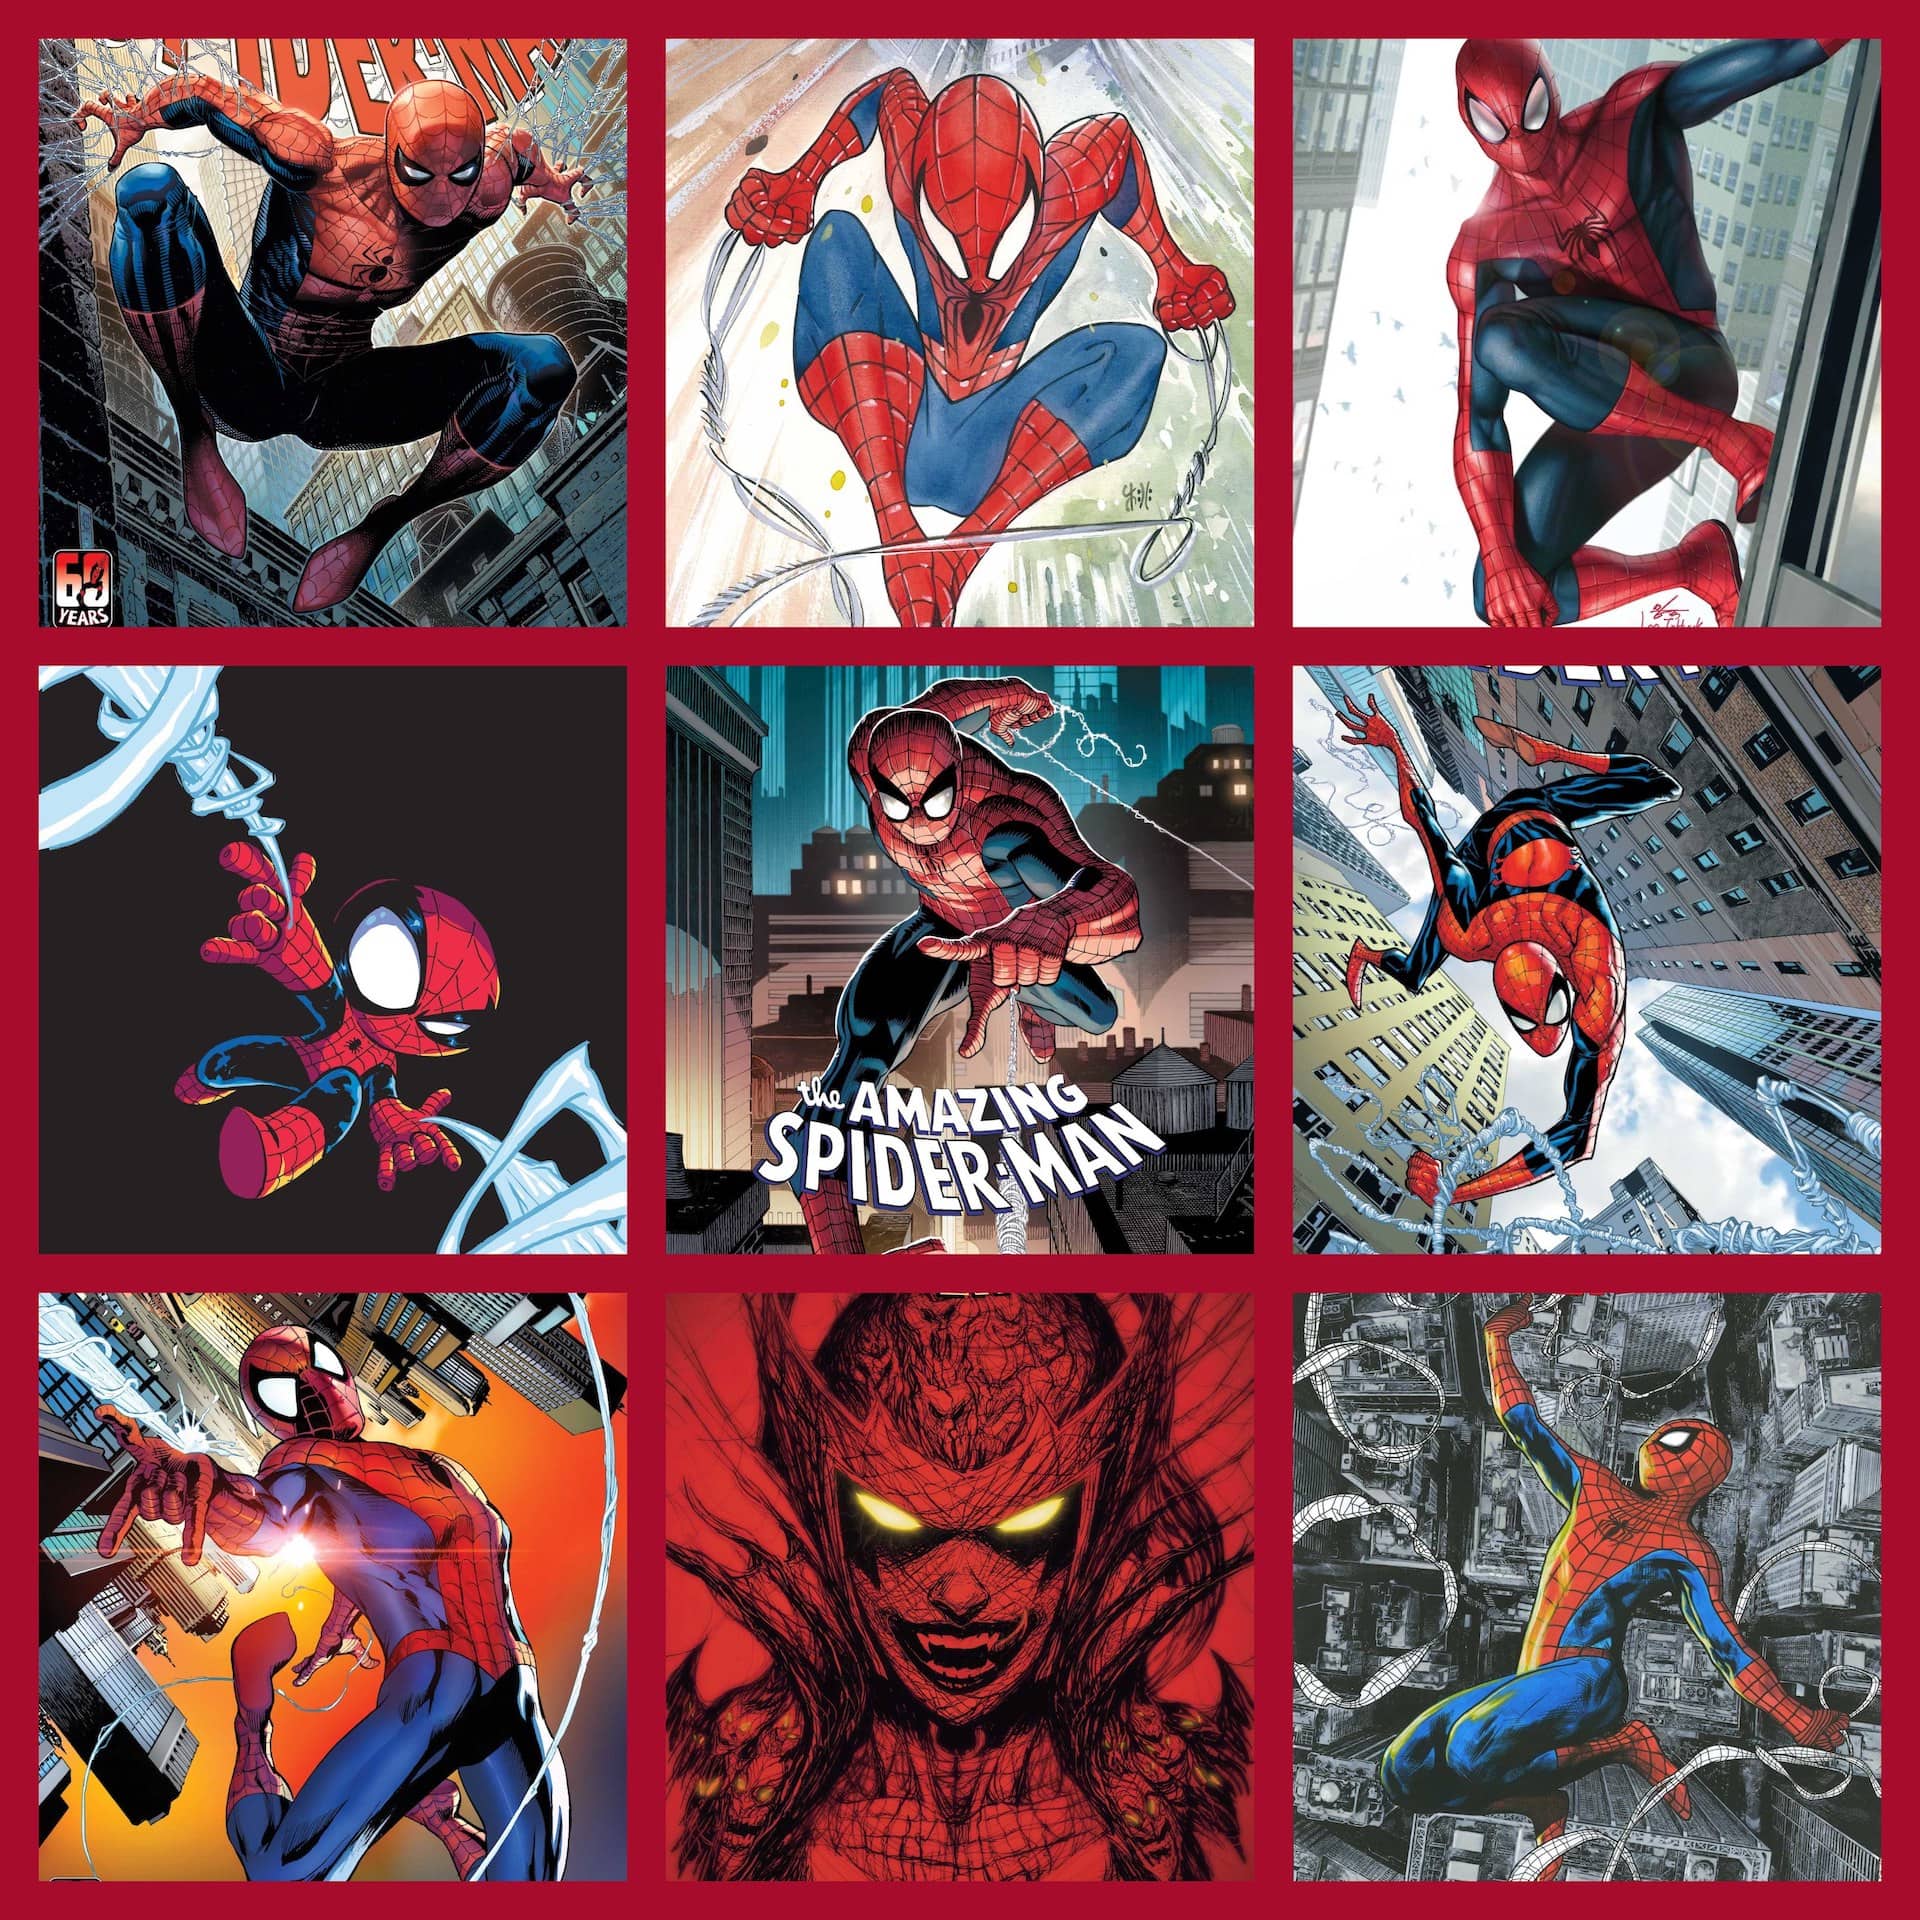 Every 'Amazing Spider-Man' #1 variant cover out April 6th